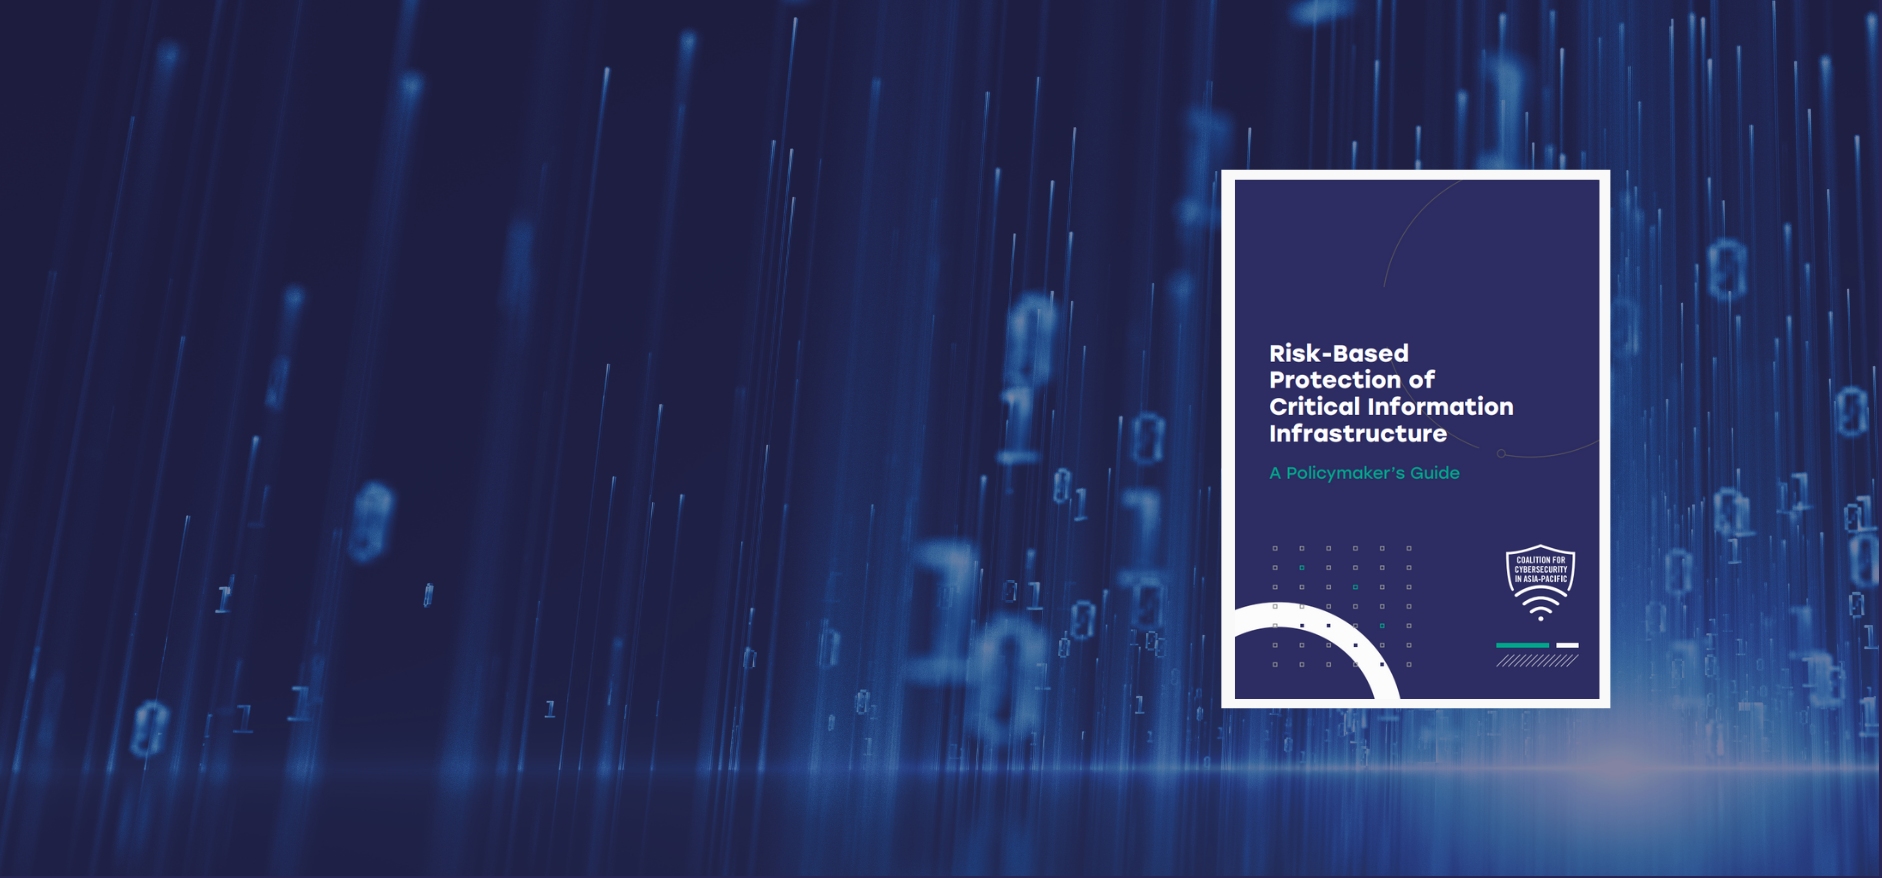 Risk-Based Protection of Critical Information Infrastructure: A Policymaker’s Guide